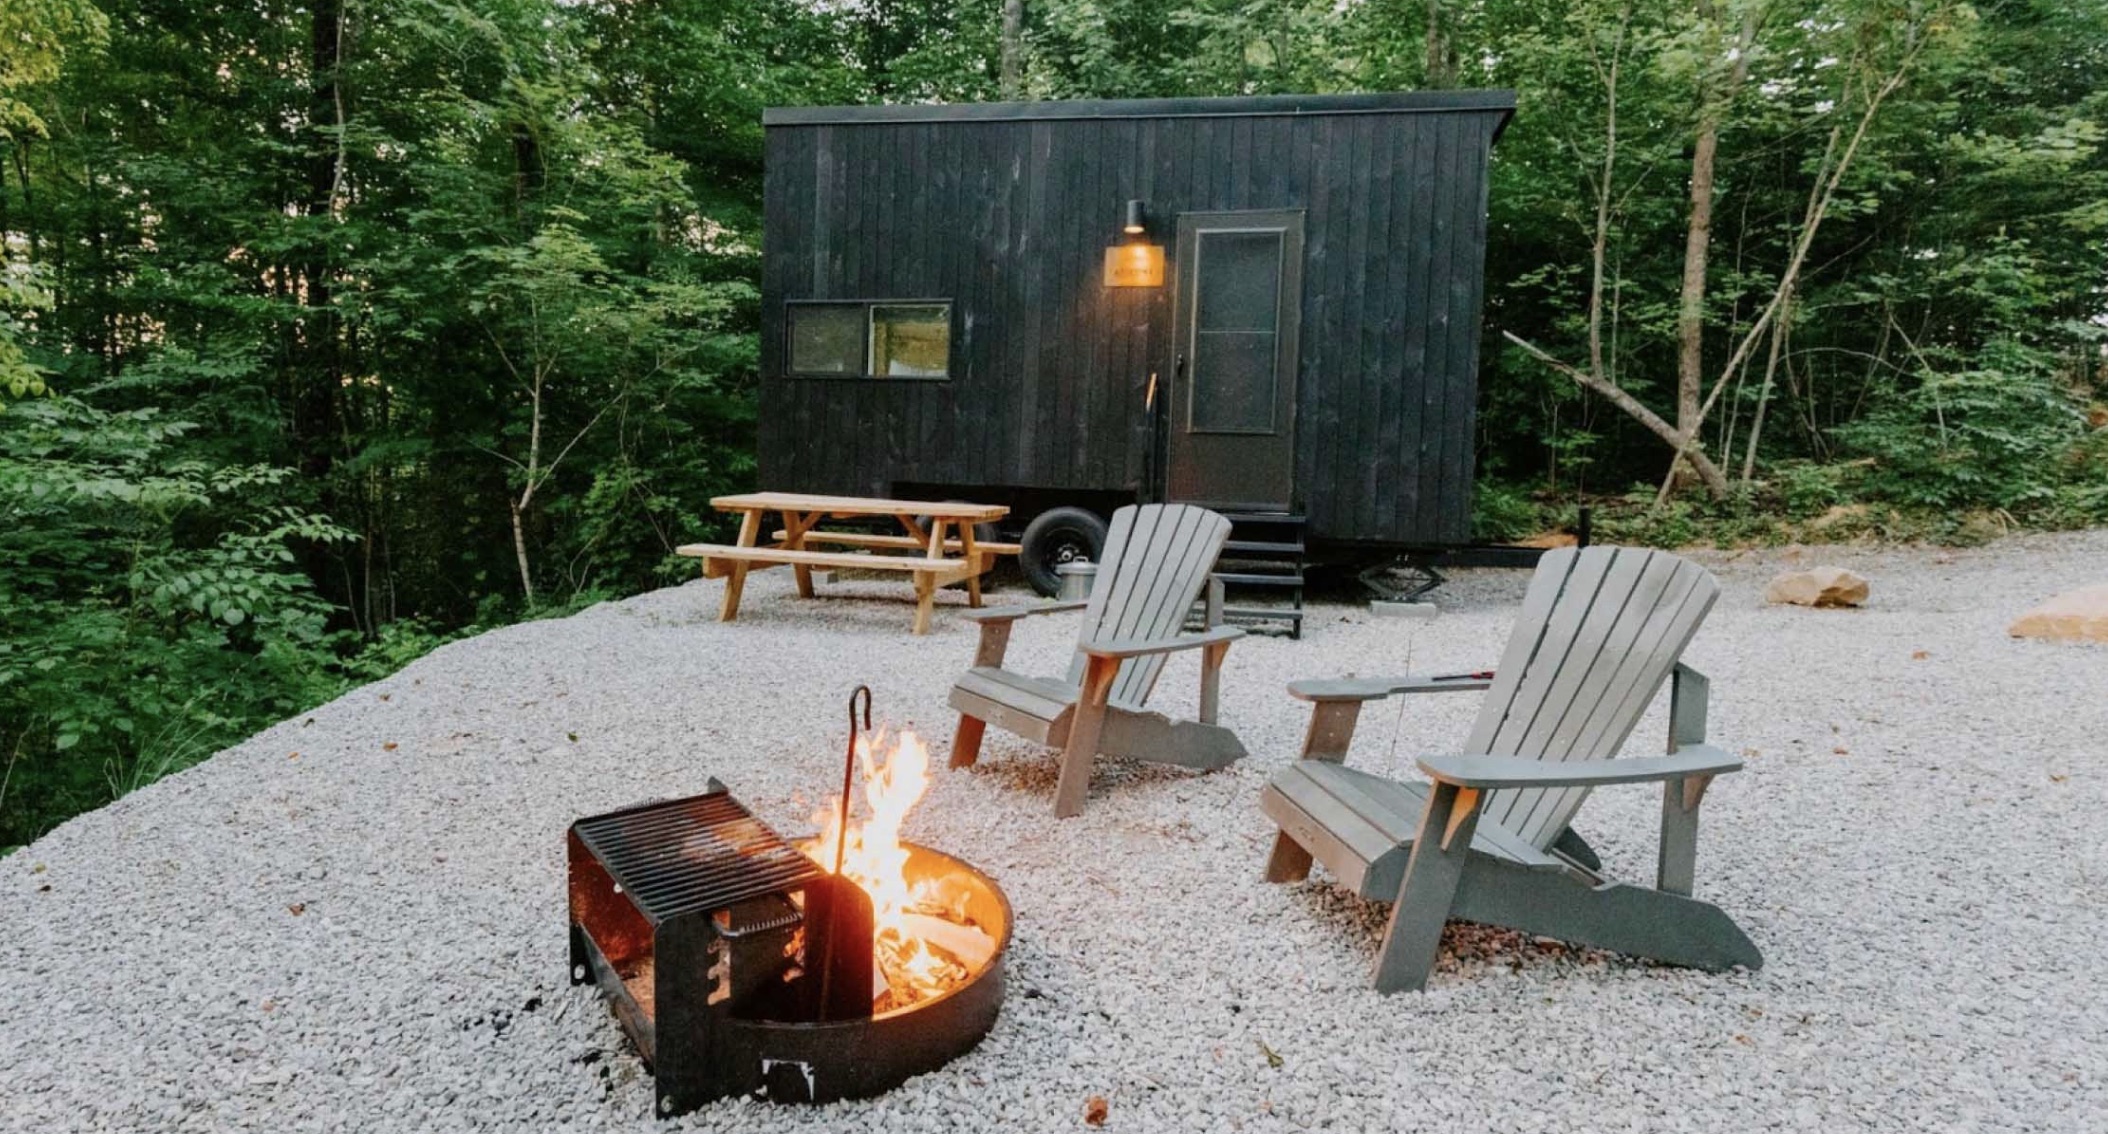 A small, black wood-paneled tiny house in the woods with a firepit and chairs in the foreground